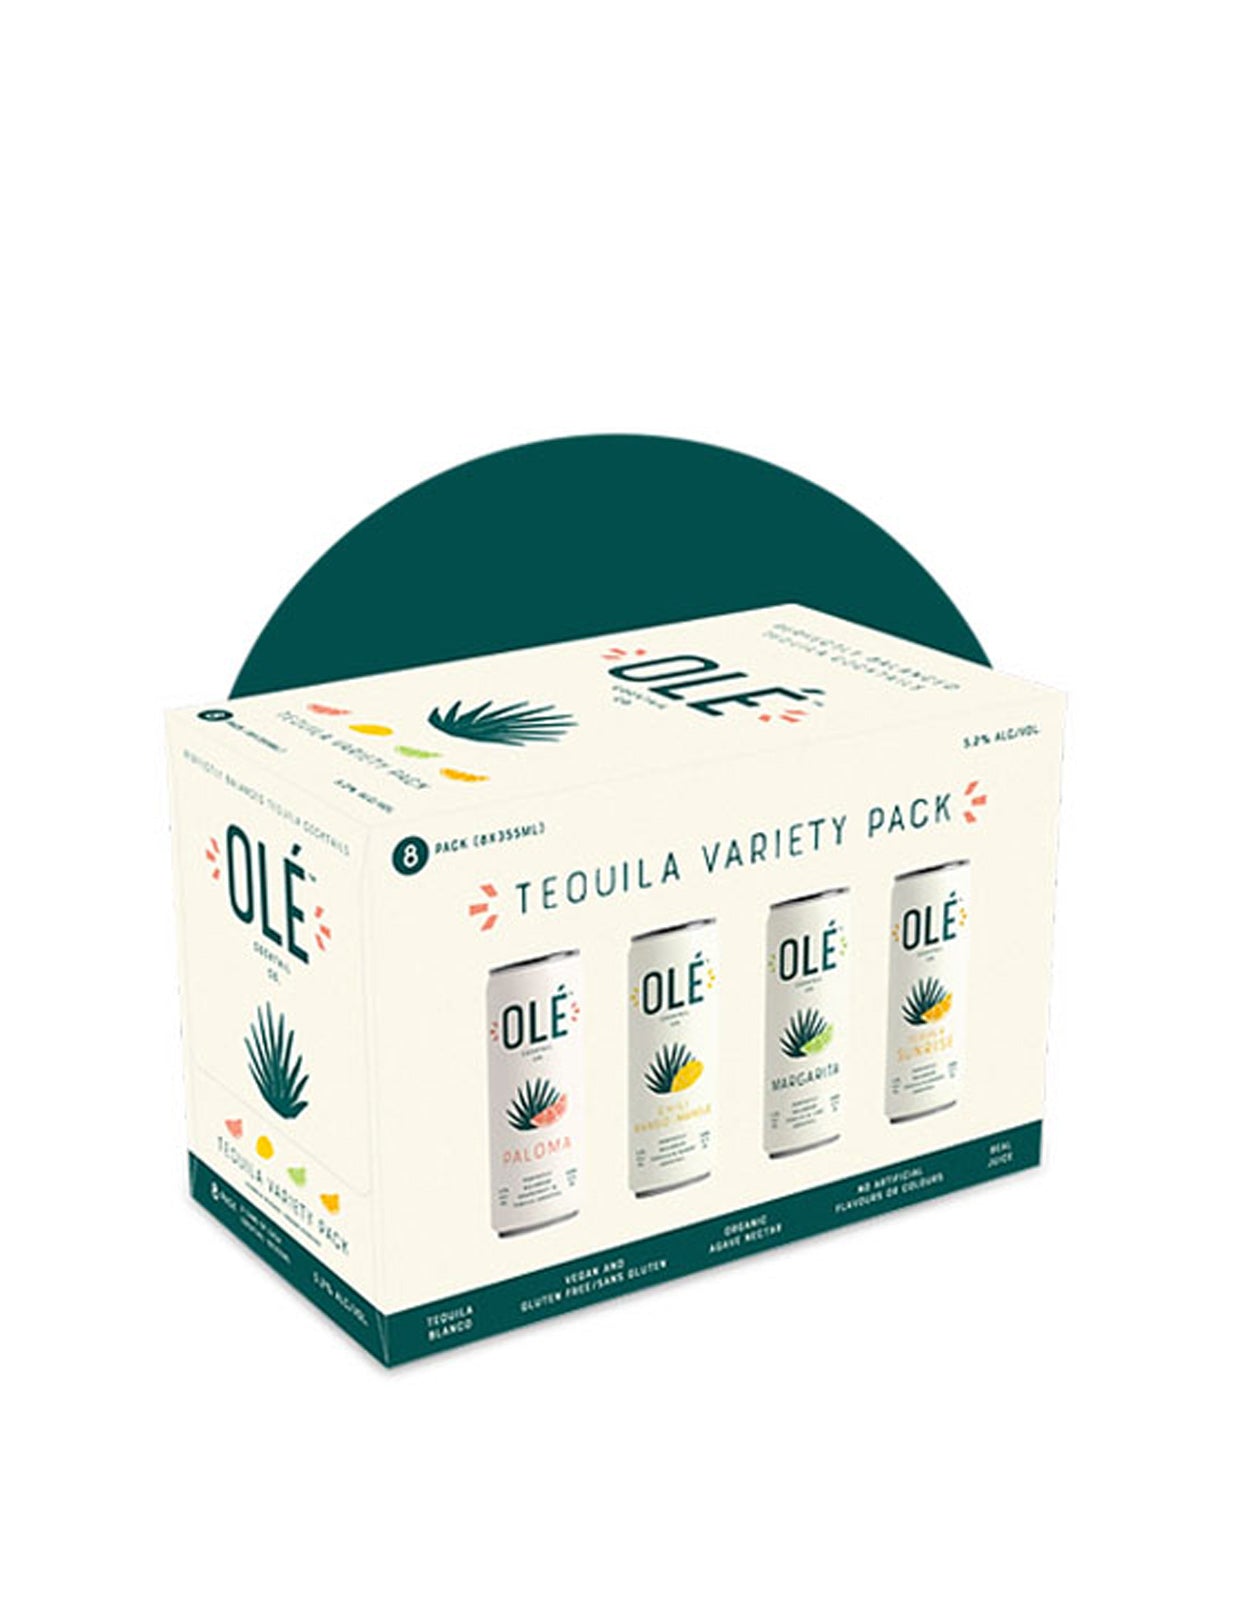 Ole Tequila Variety Pack 355 ml - 8 Cans